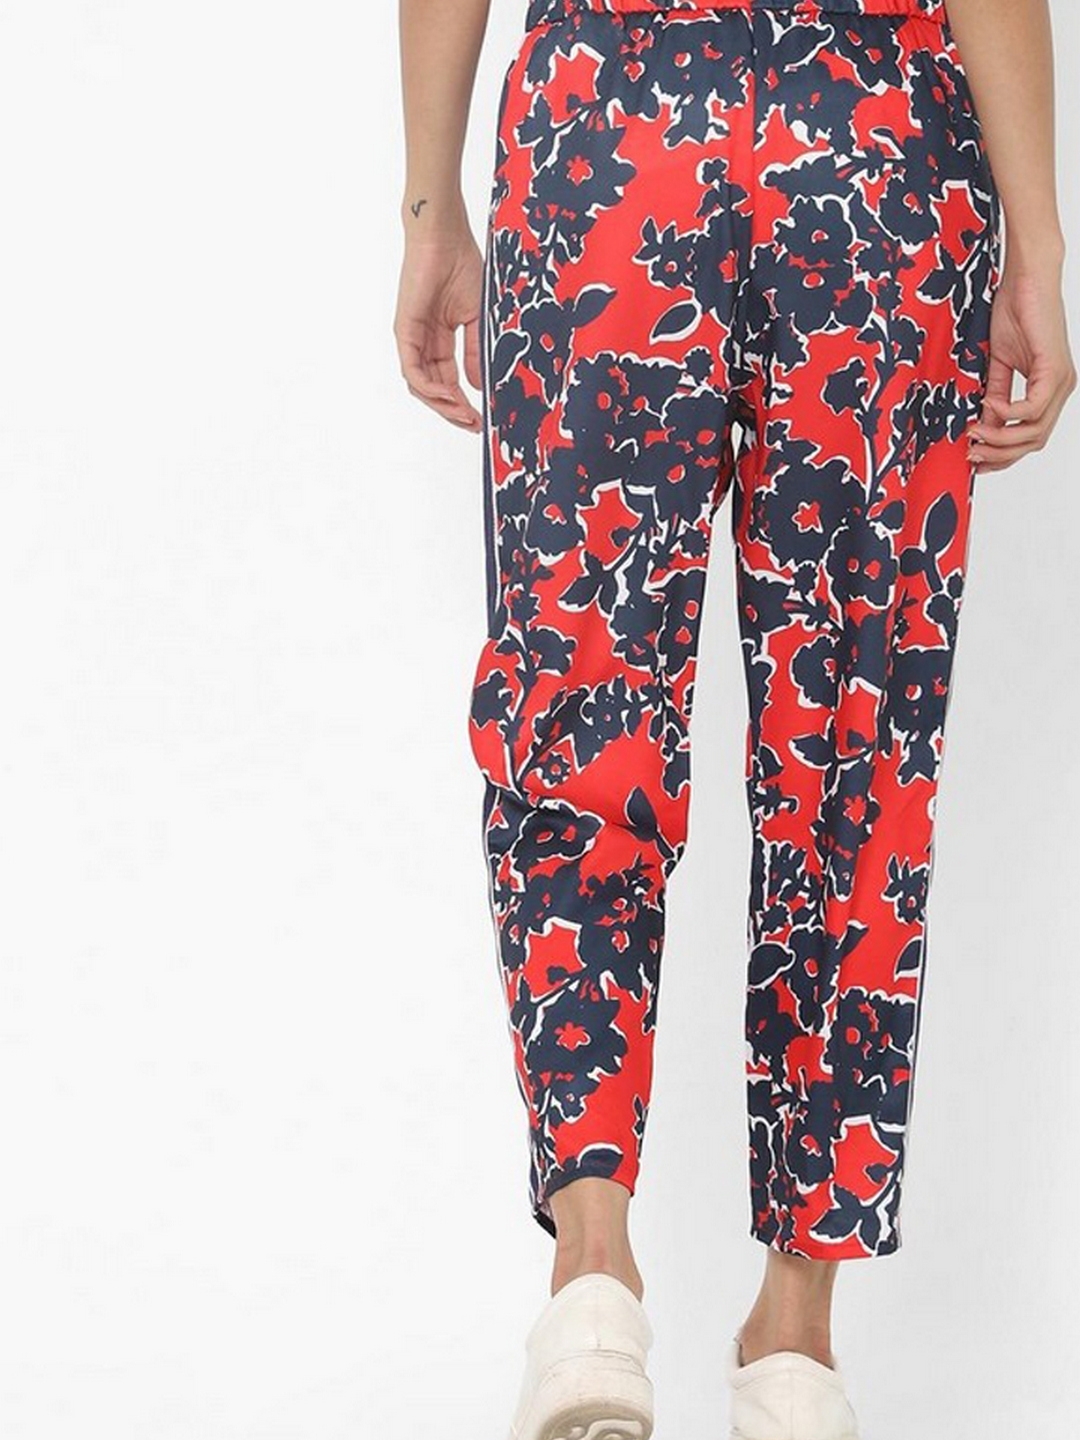 QZHDUAO Floral Printed Casual Pants Slim Fit Flower India  Ubuy